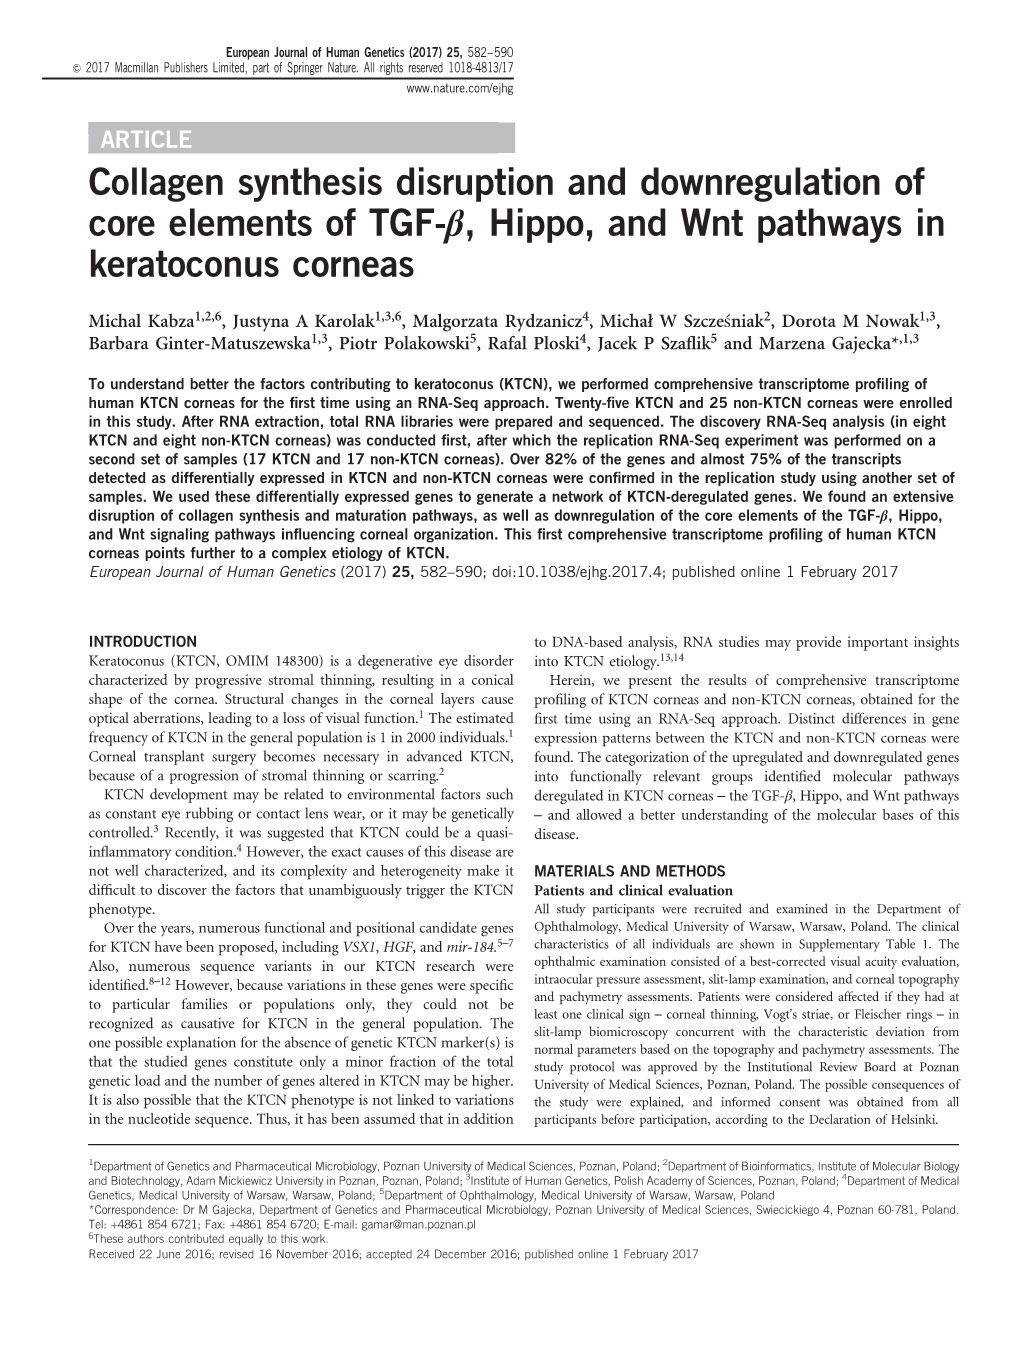 Collagen Synthesis Disruption and Downregulation of Core Elements of TGF-Β, Hippo, and Wnt Pathways in Keratoconus Corneas